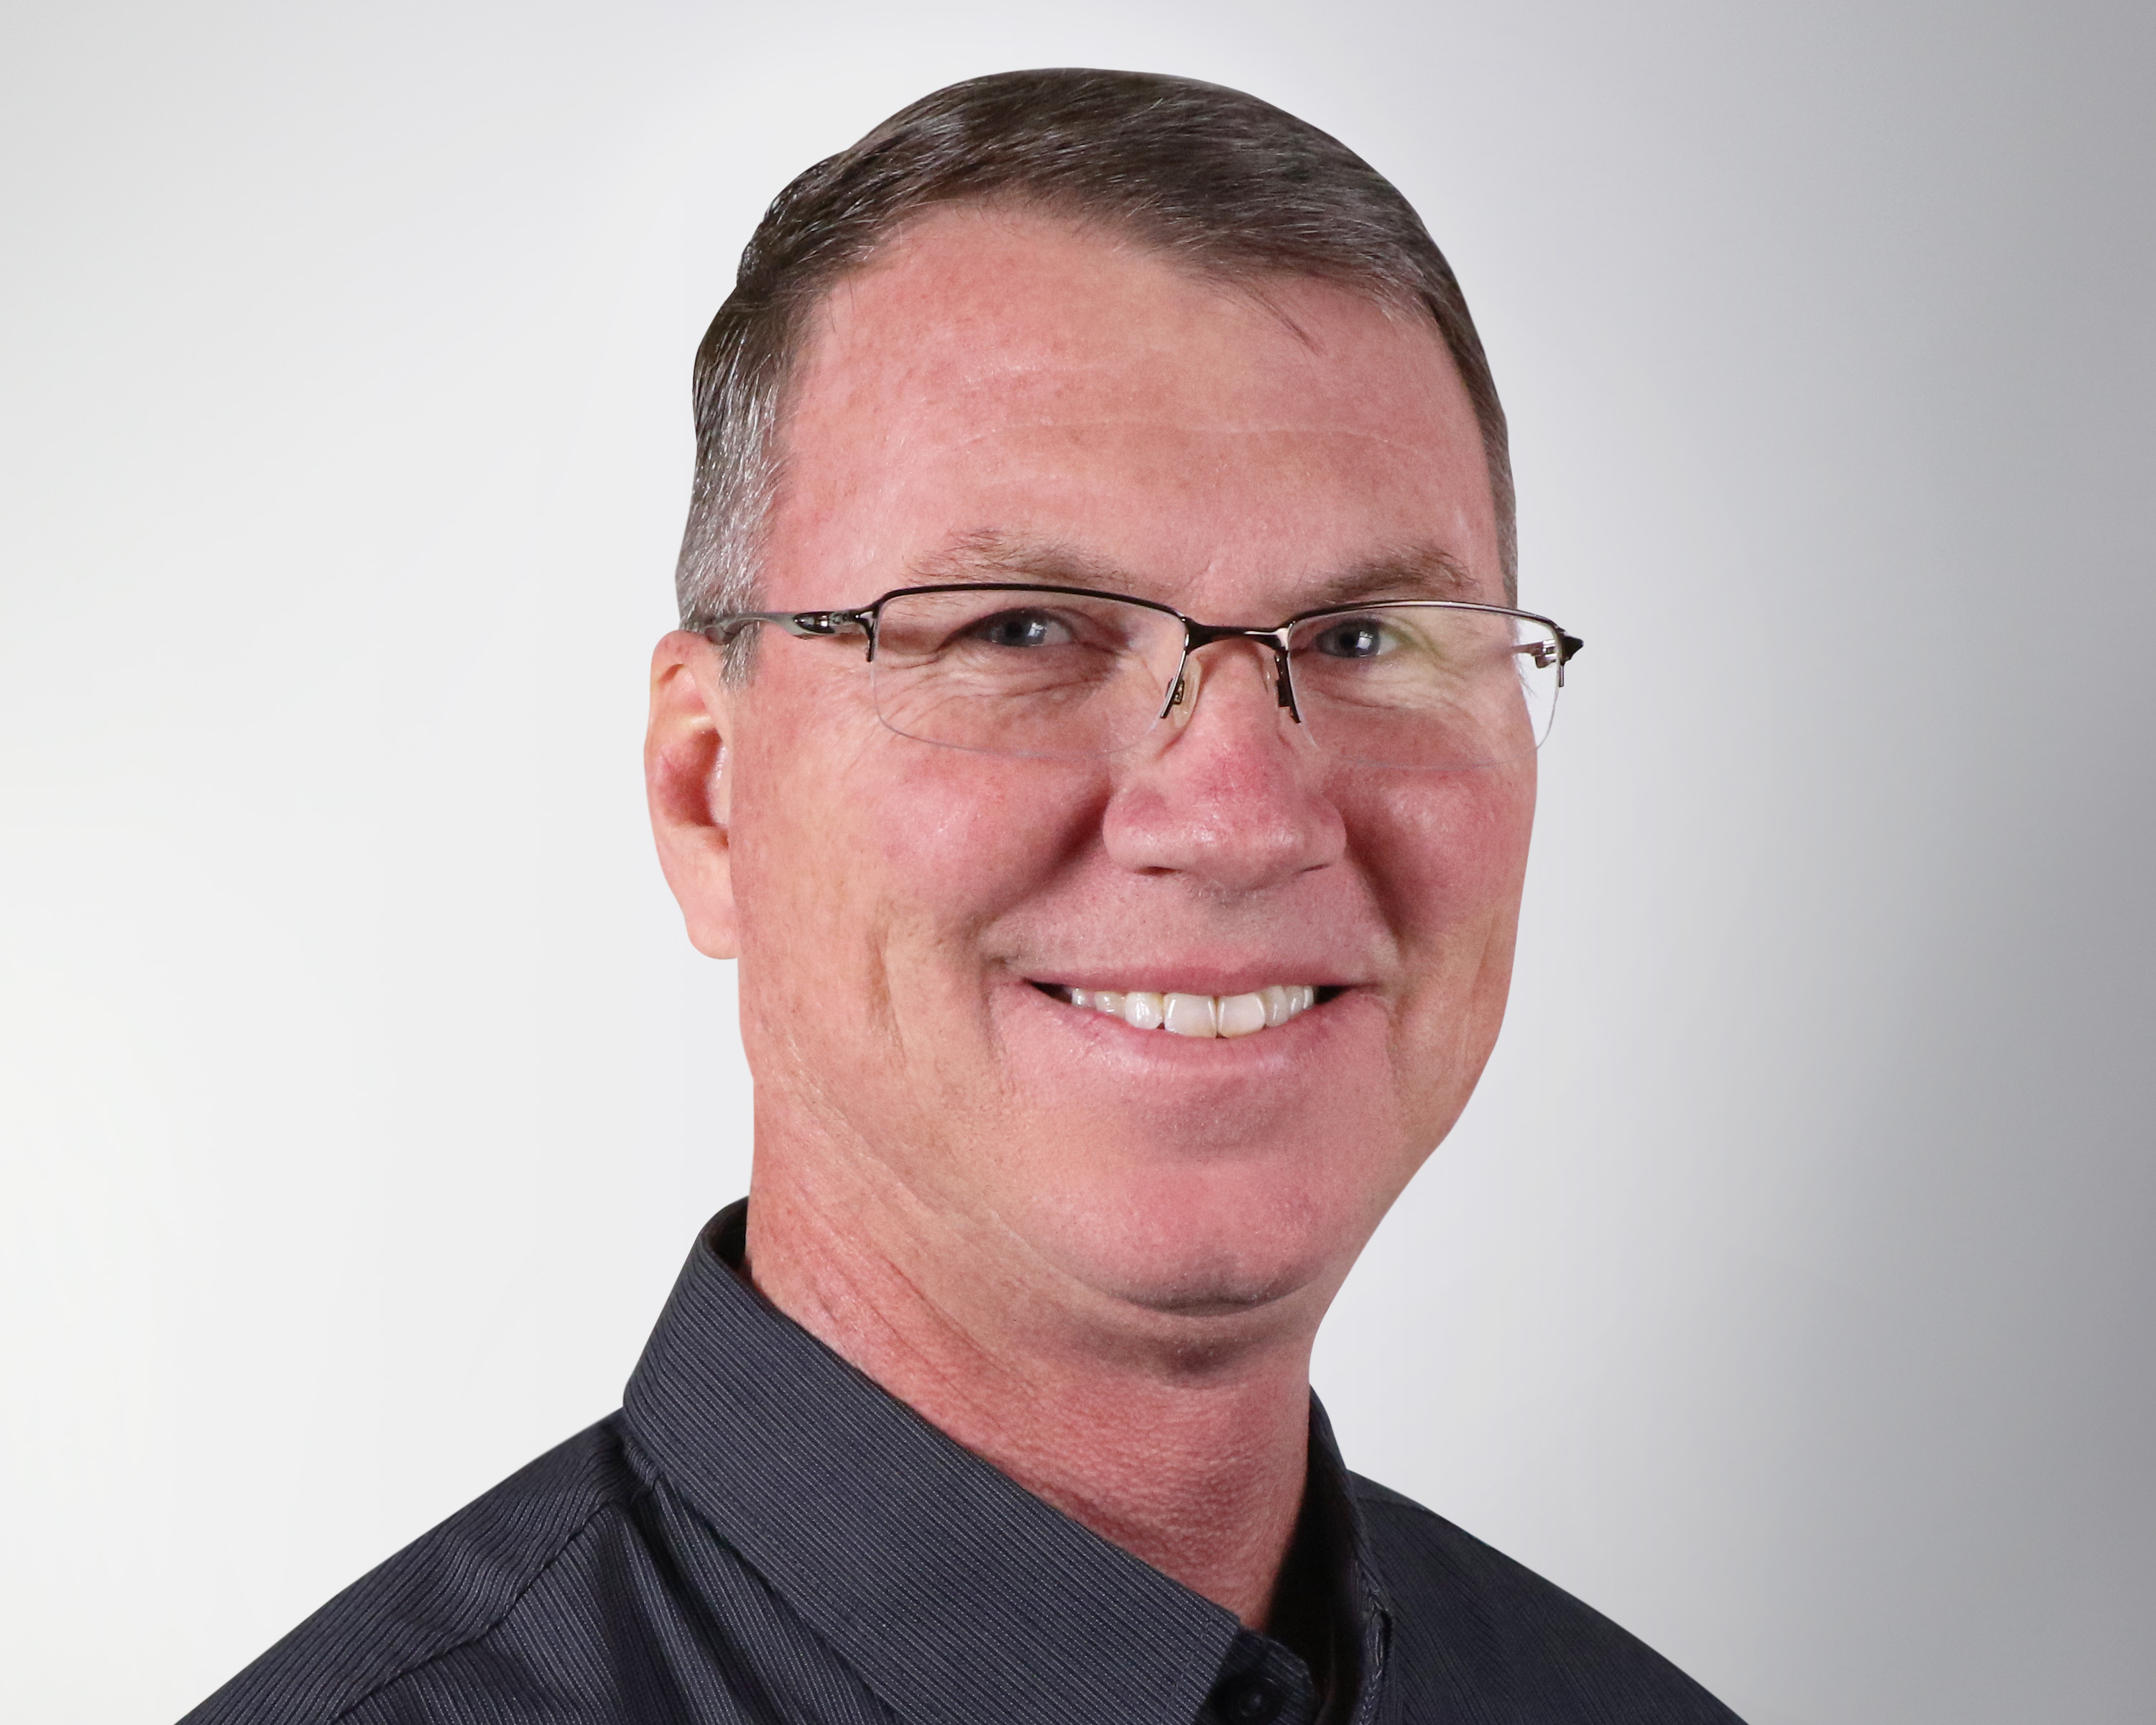 Todd Smith, Link’s new senior OE account manager, has a background of more than 21 years of selling highly engineered products, systems and components to on- and off-highway OEMs.